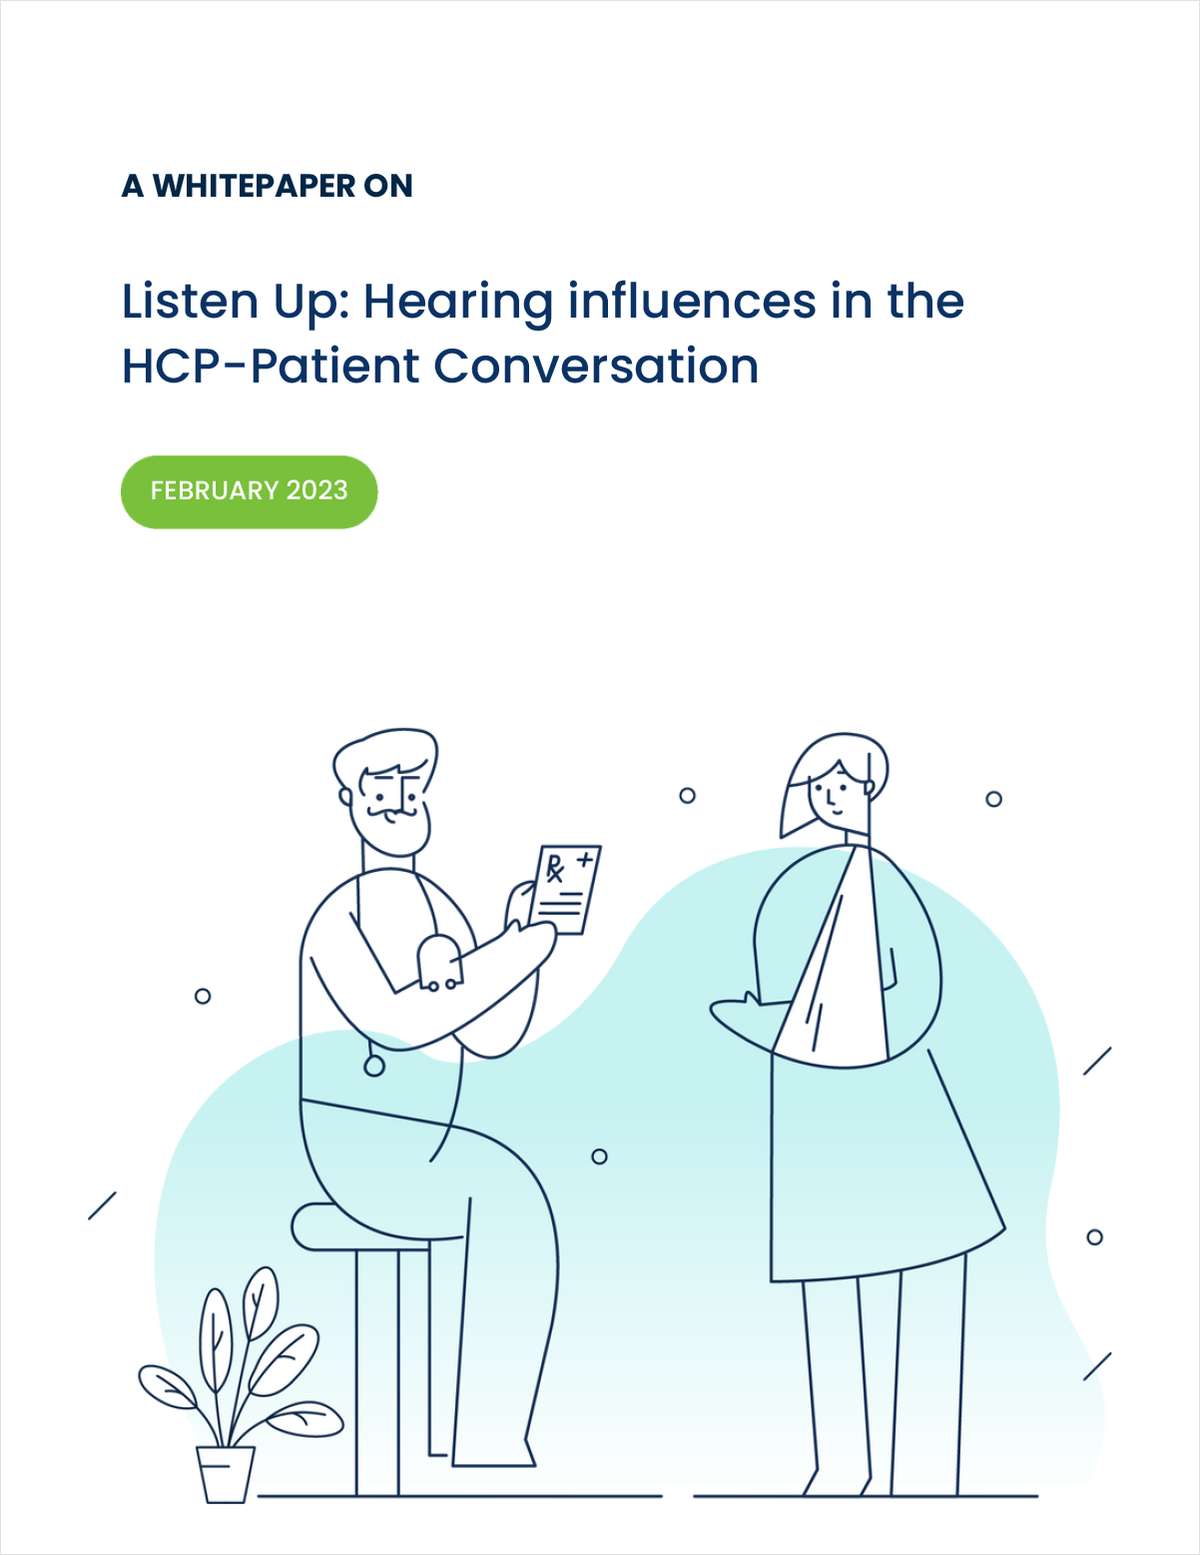 Uncovering key messaging influences in the HCP-Patient Dialogue